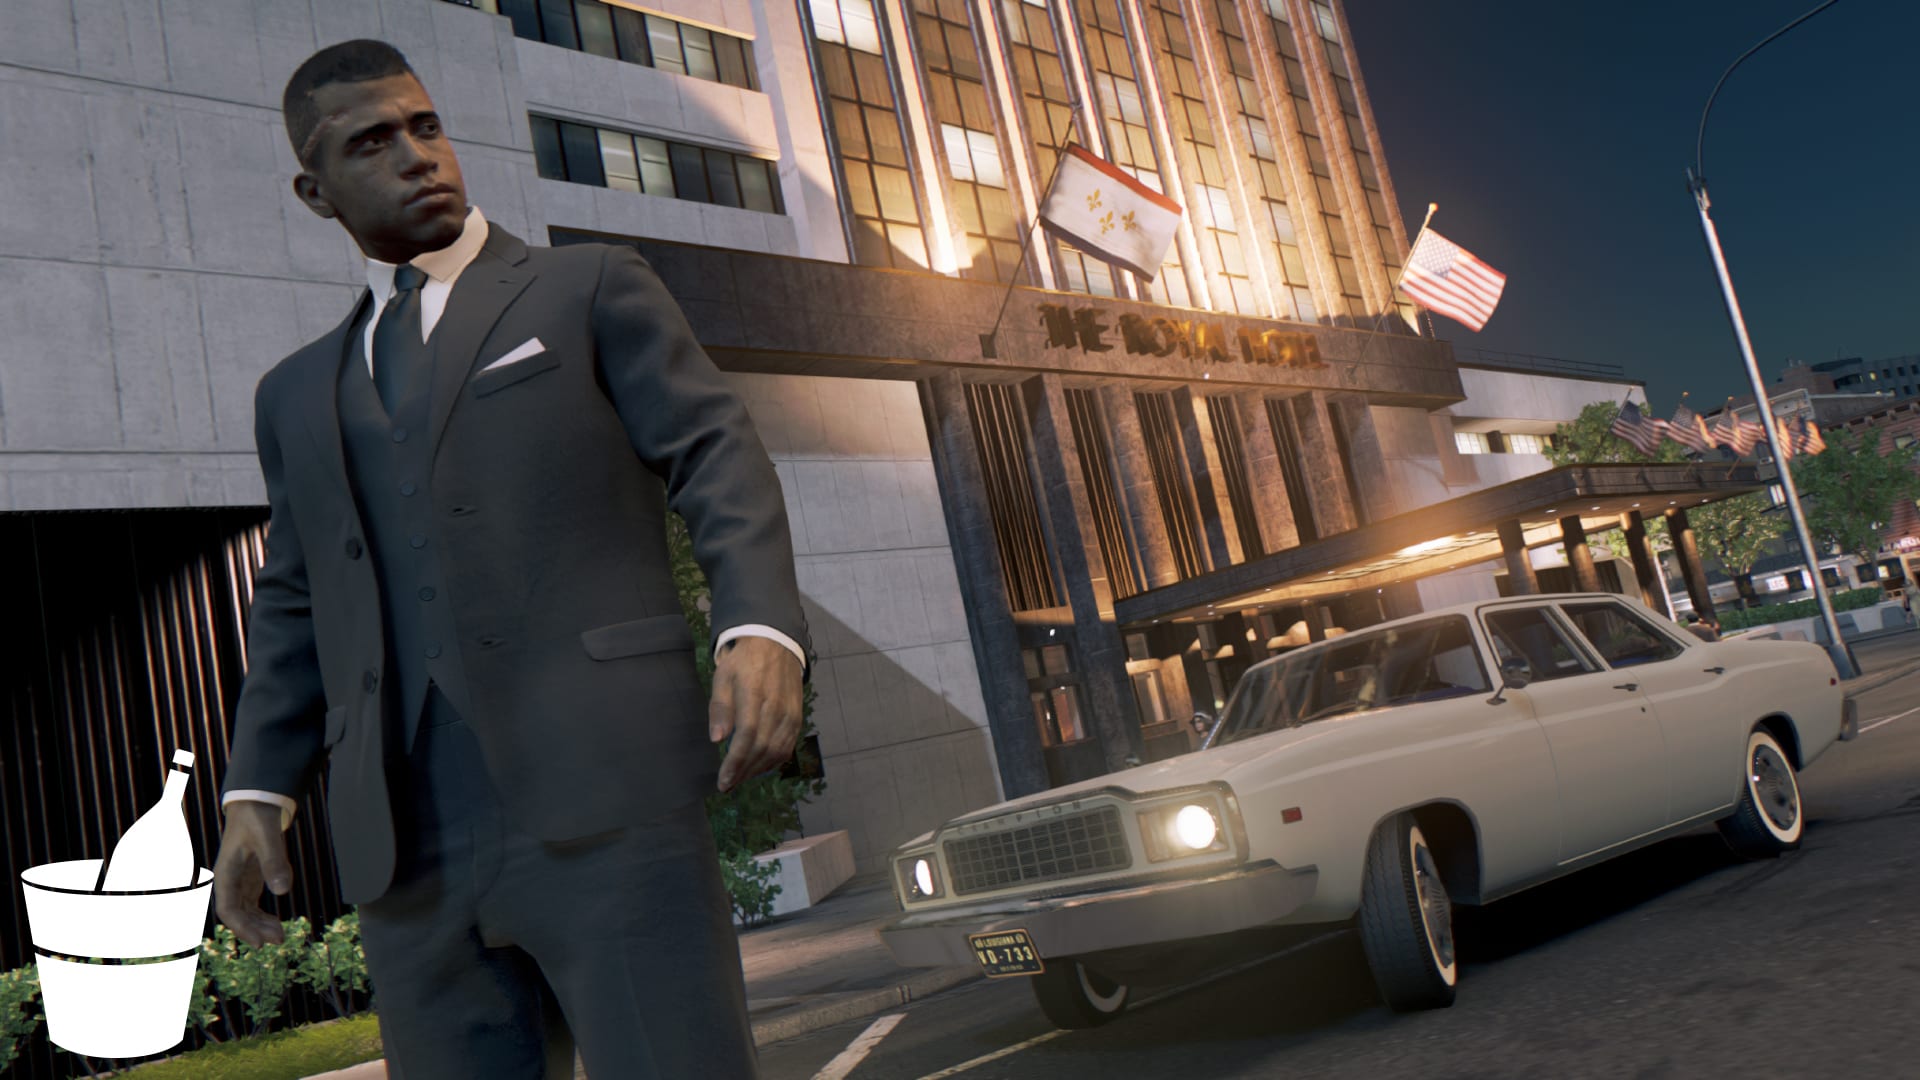 Video: Mafia 3 PS4 Update 1.04 Improves the Game's Graphics and Adds Free DLC